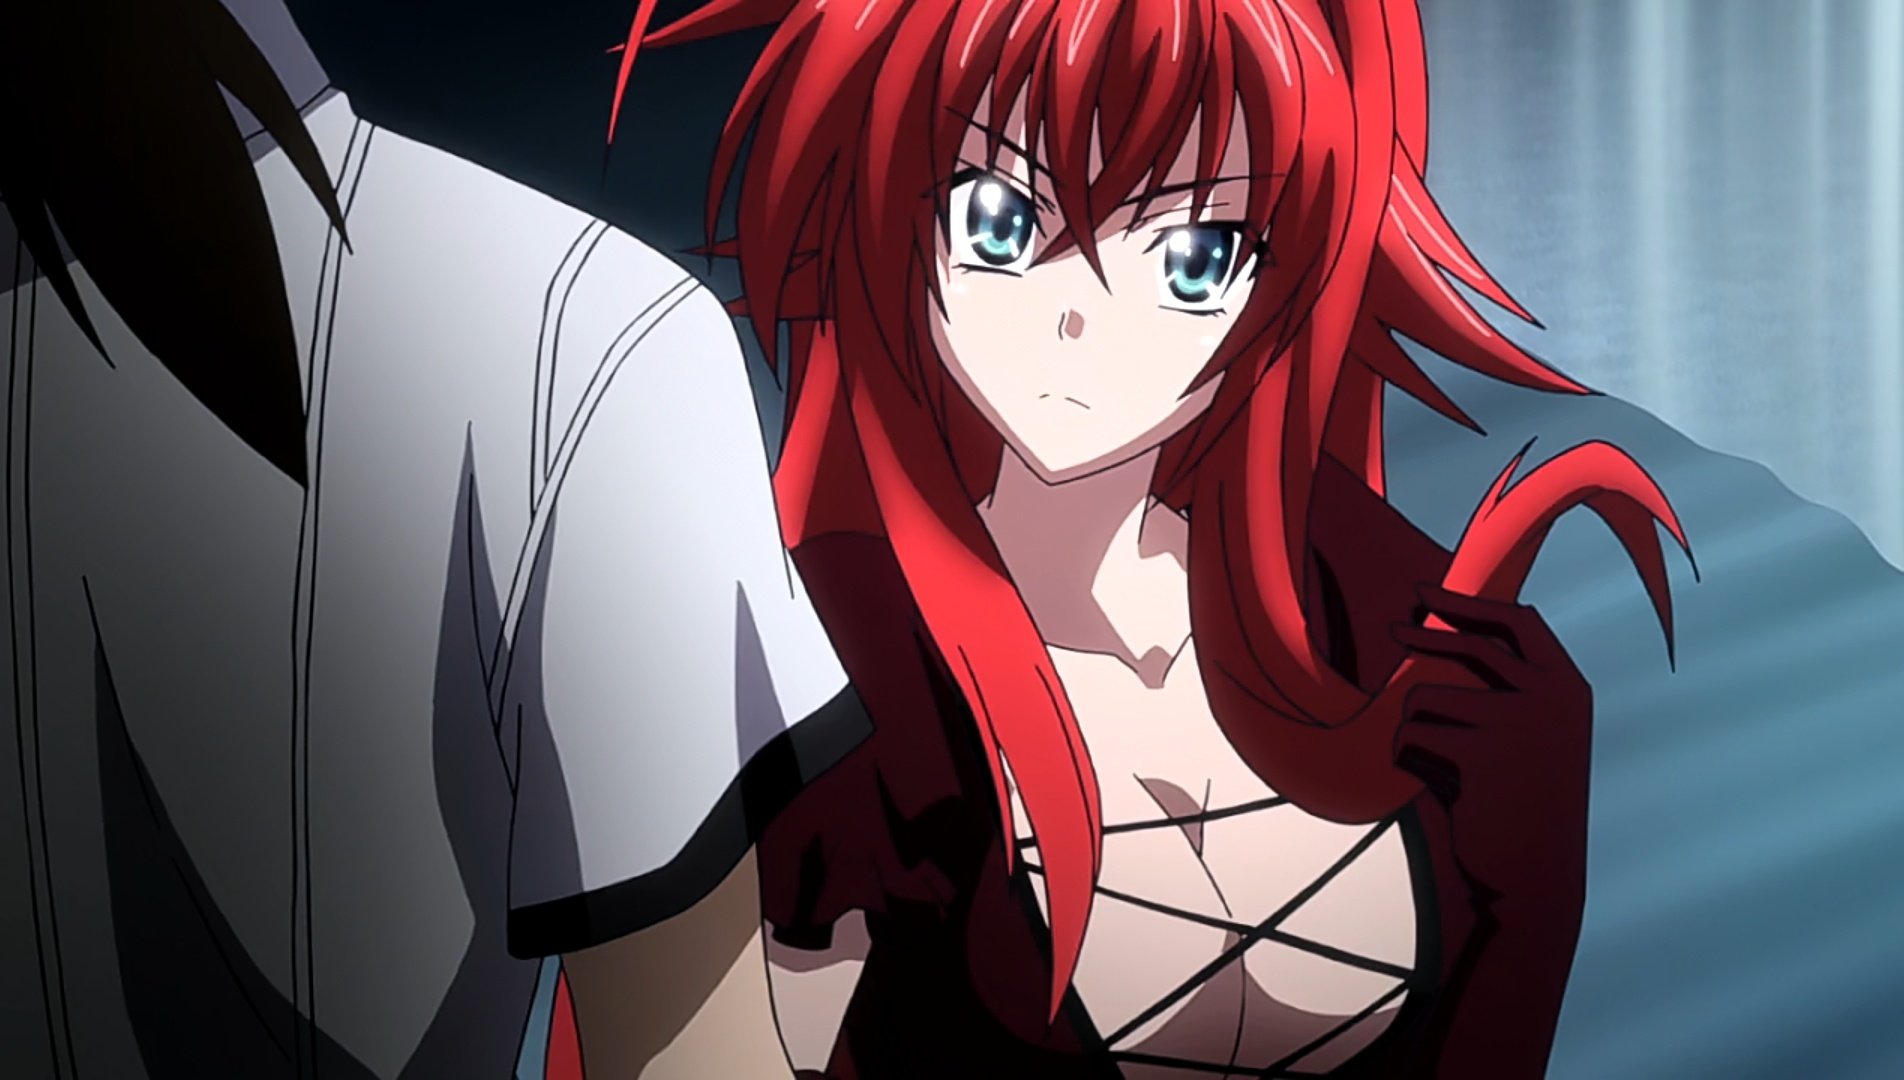 Issei The Red Dragon Emperor on X: High School Dxd Characters >>>>>  #HighSchoolDxD #RiasGremory #HighSchoolDxD #Anime   / X